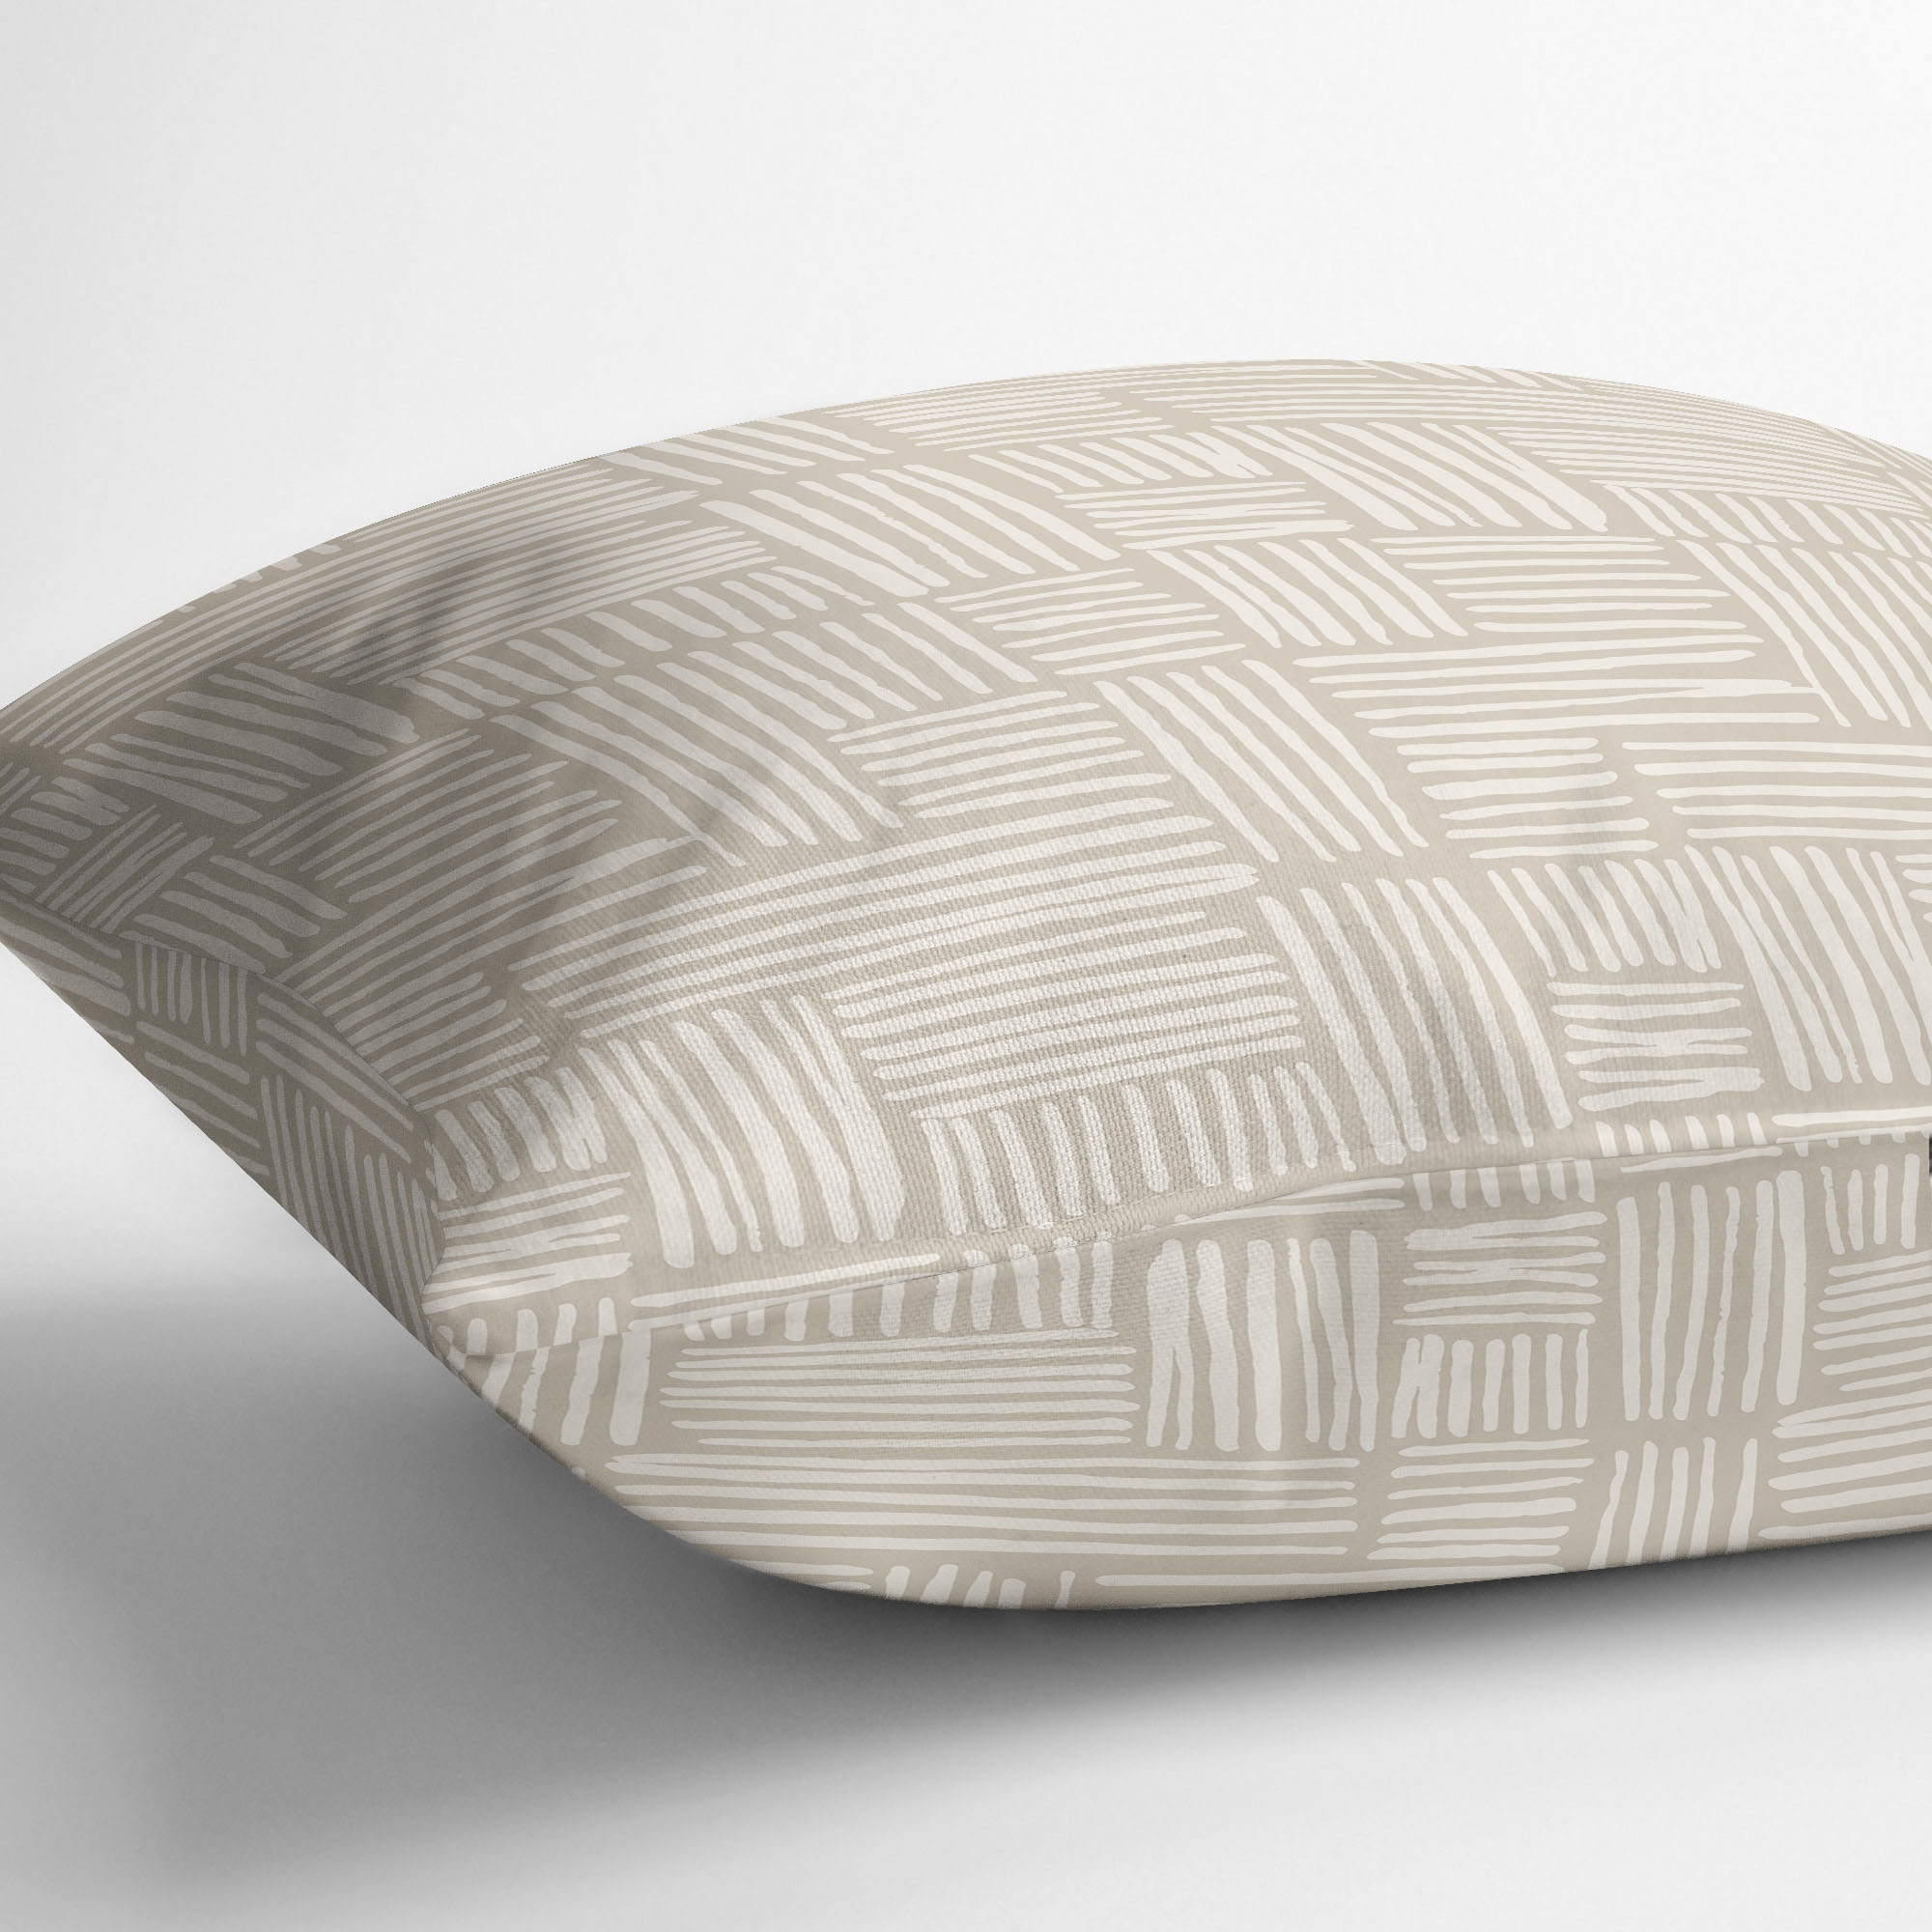 Rails Beige Outdoor Pillow by Kavka Designs - image 4 of 5